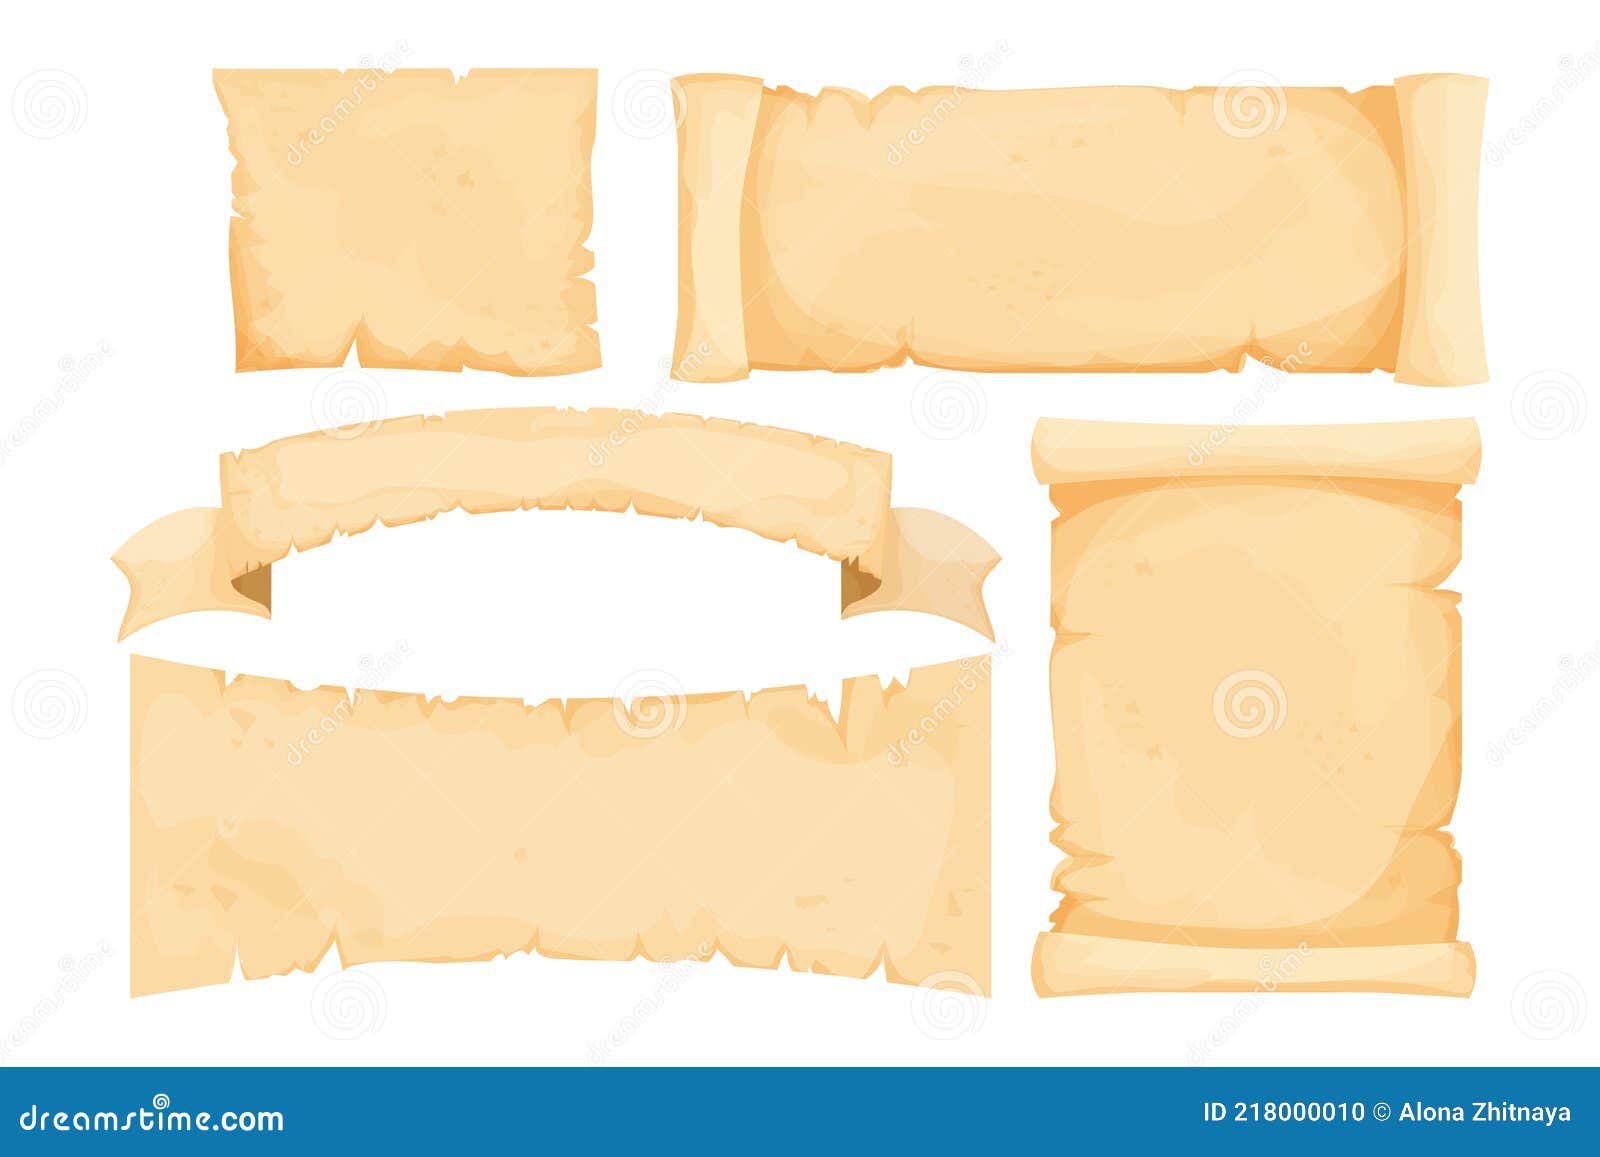 https://thumbs.dreamstime.com/z/set-parchment-scroll-papyrus-antique-paper-blank-cartoon-style-isolated-white-background-fairy-fantasy-element-set-parchment-218000010.jpg